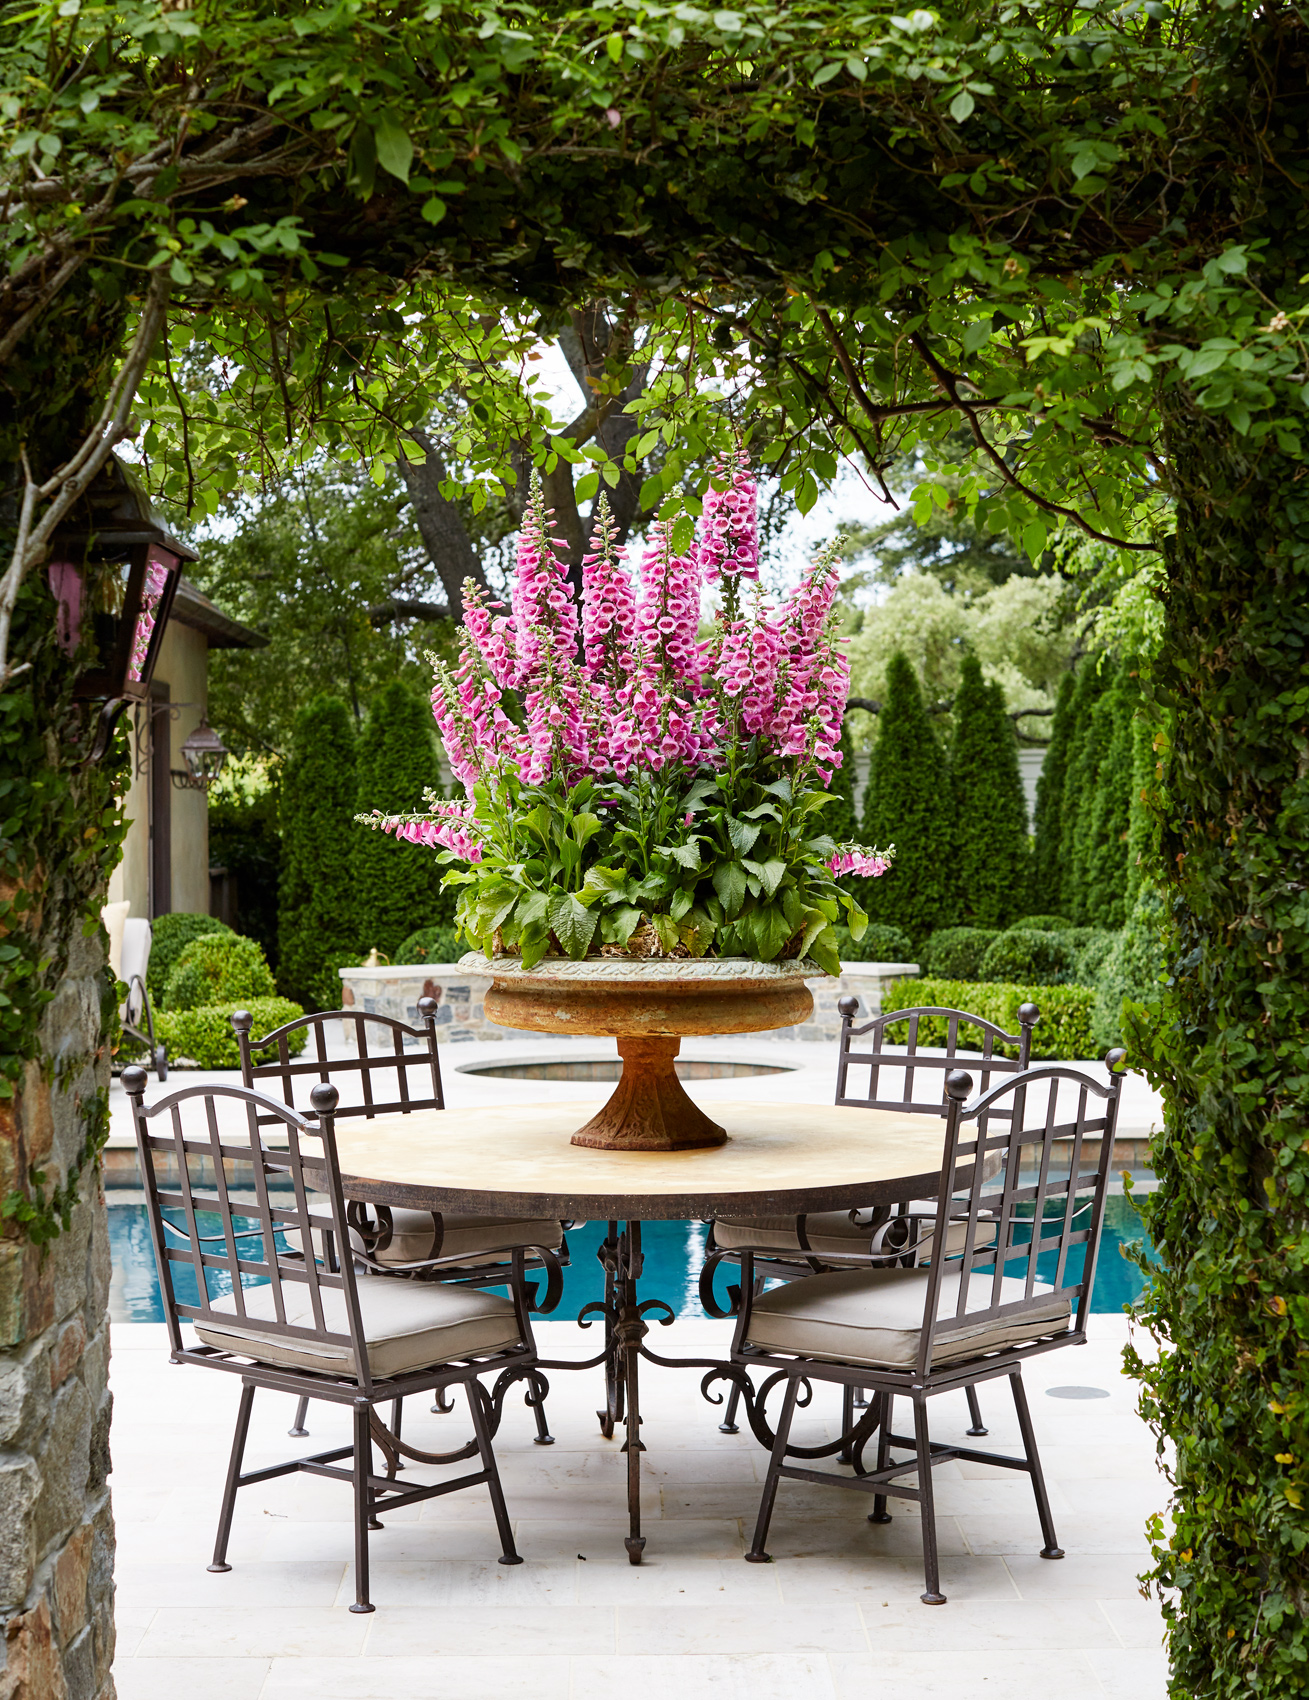 2020.TradHome.GilliamGardens_057